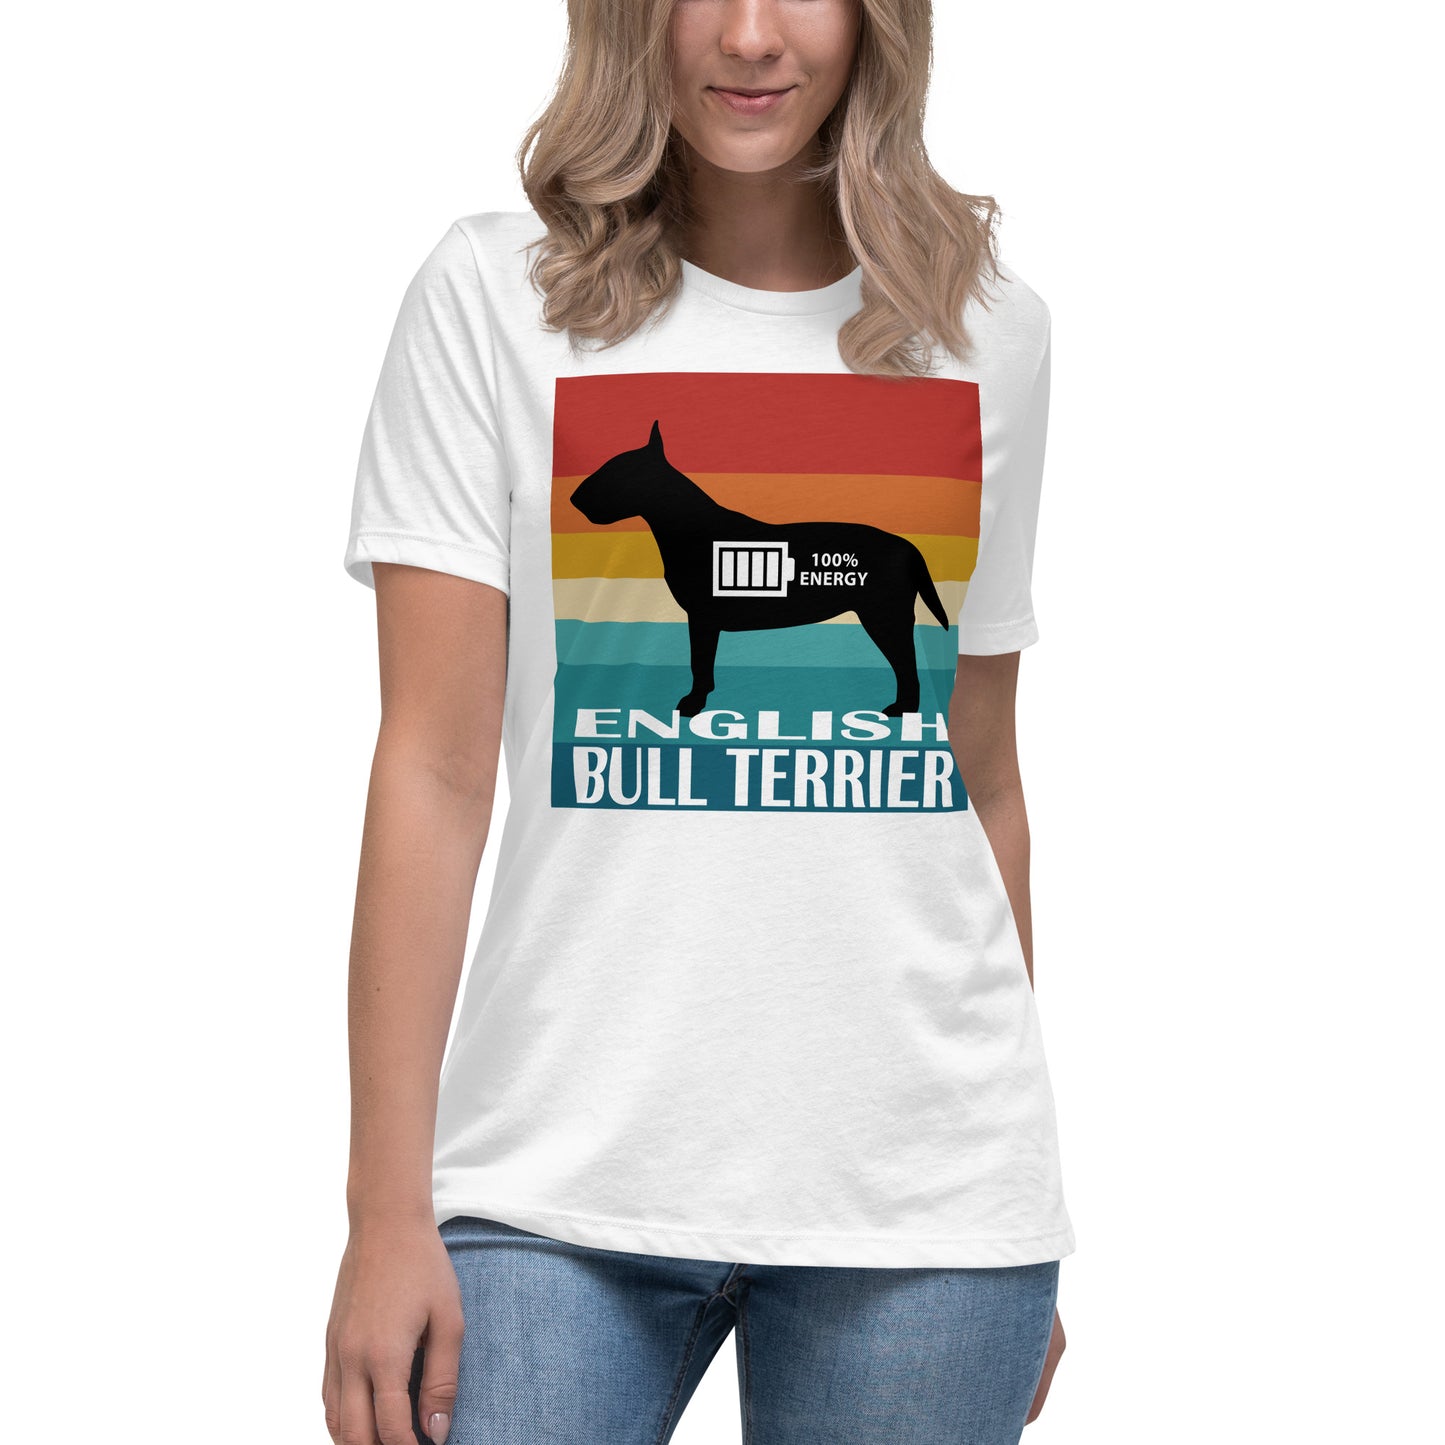 English Bull Terrier 100%  Energy Women's Relaxed T-Shirt by Dog Artistry